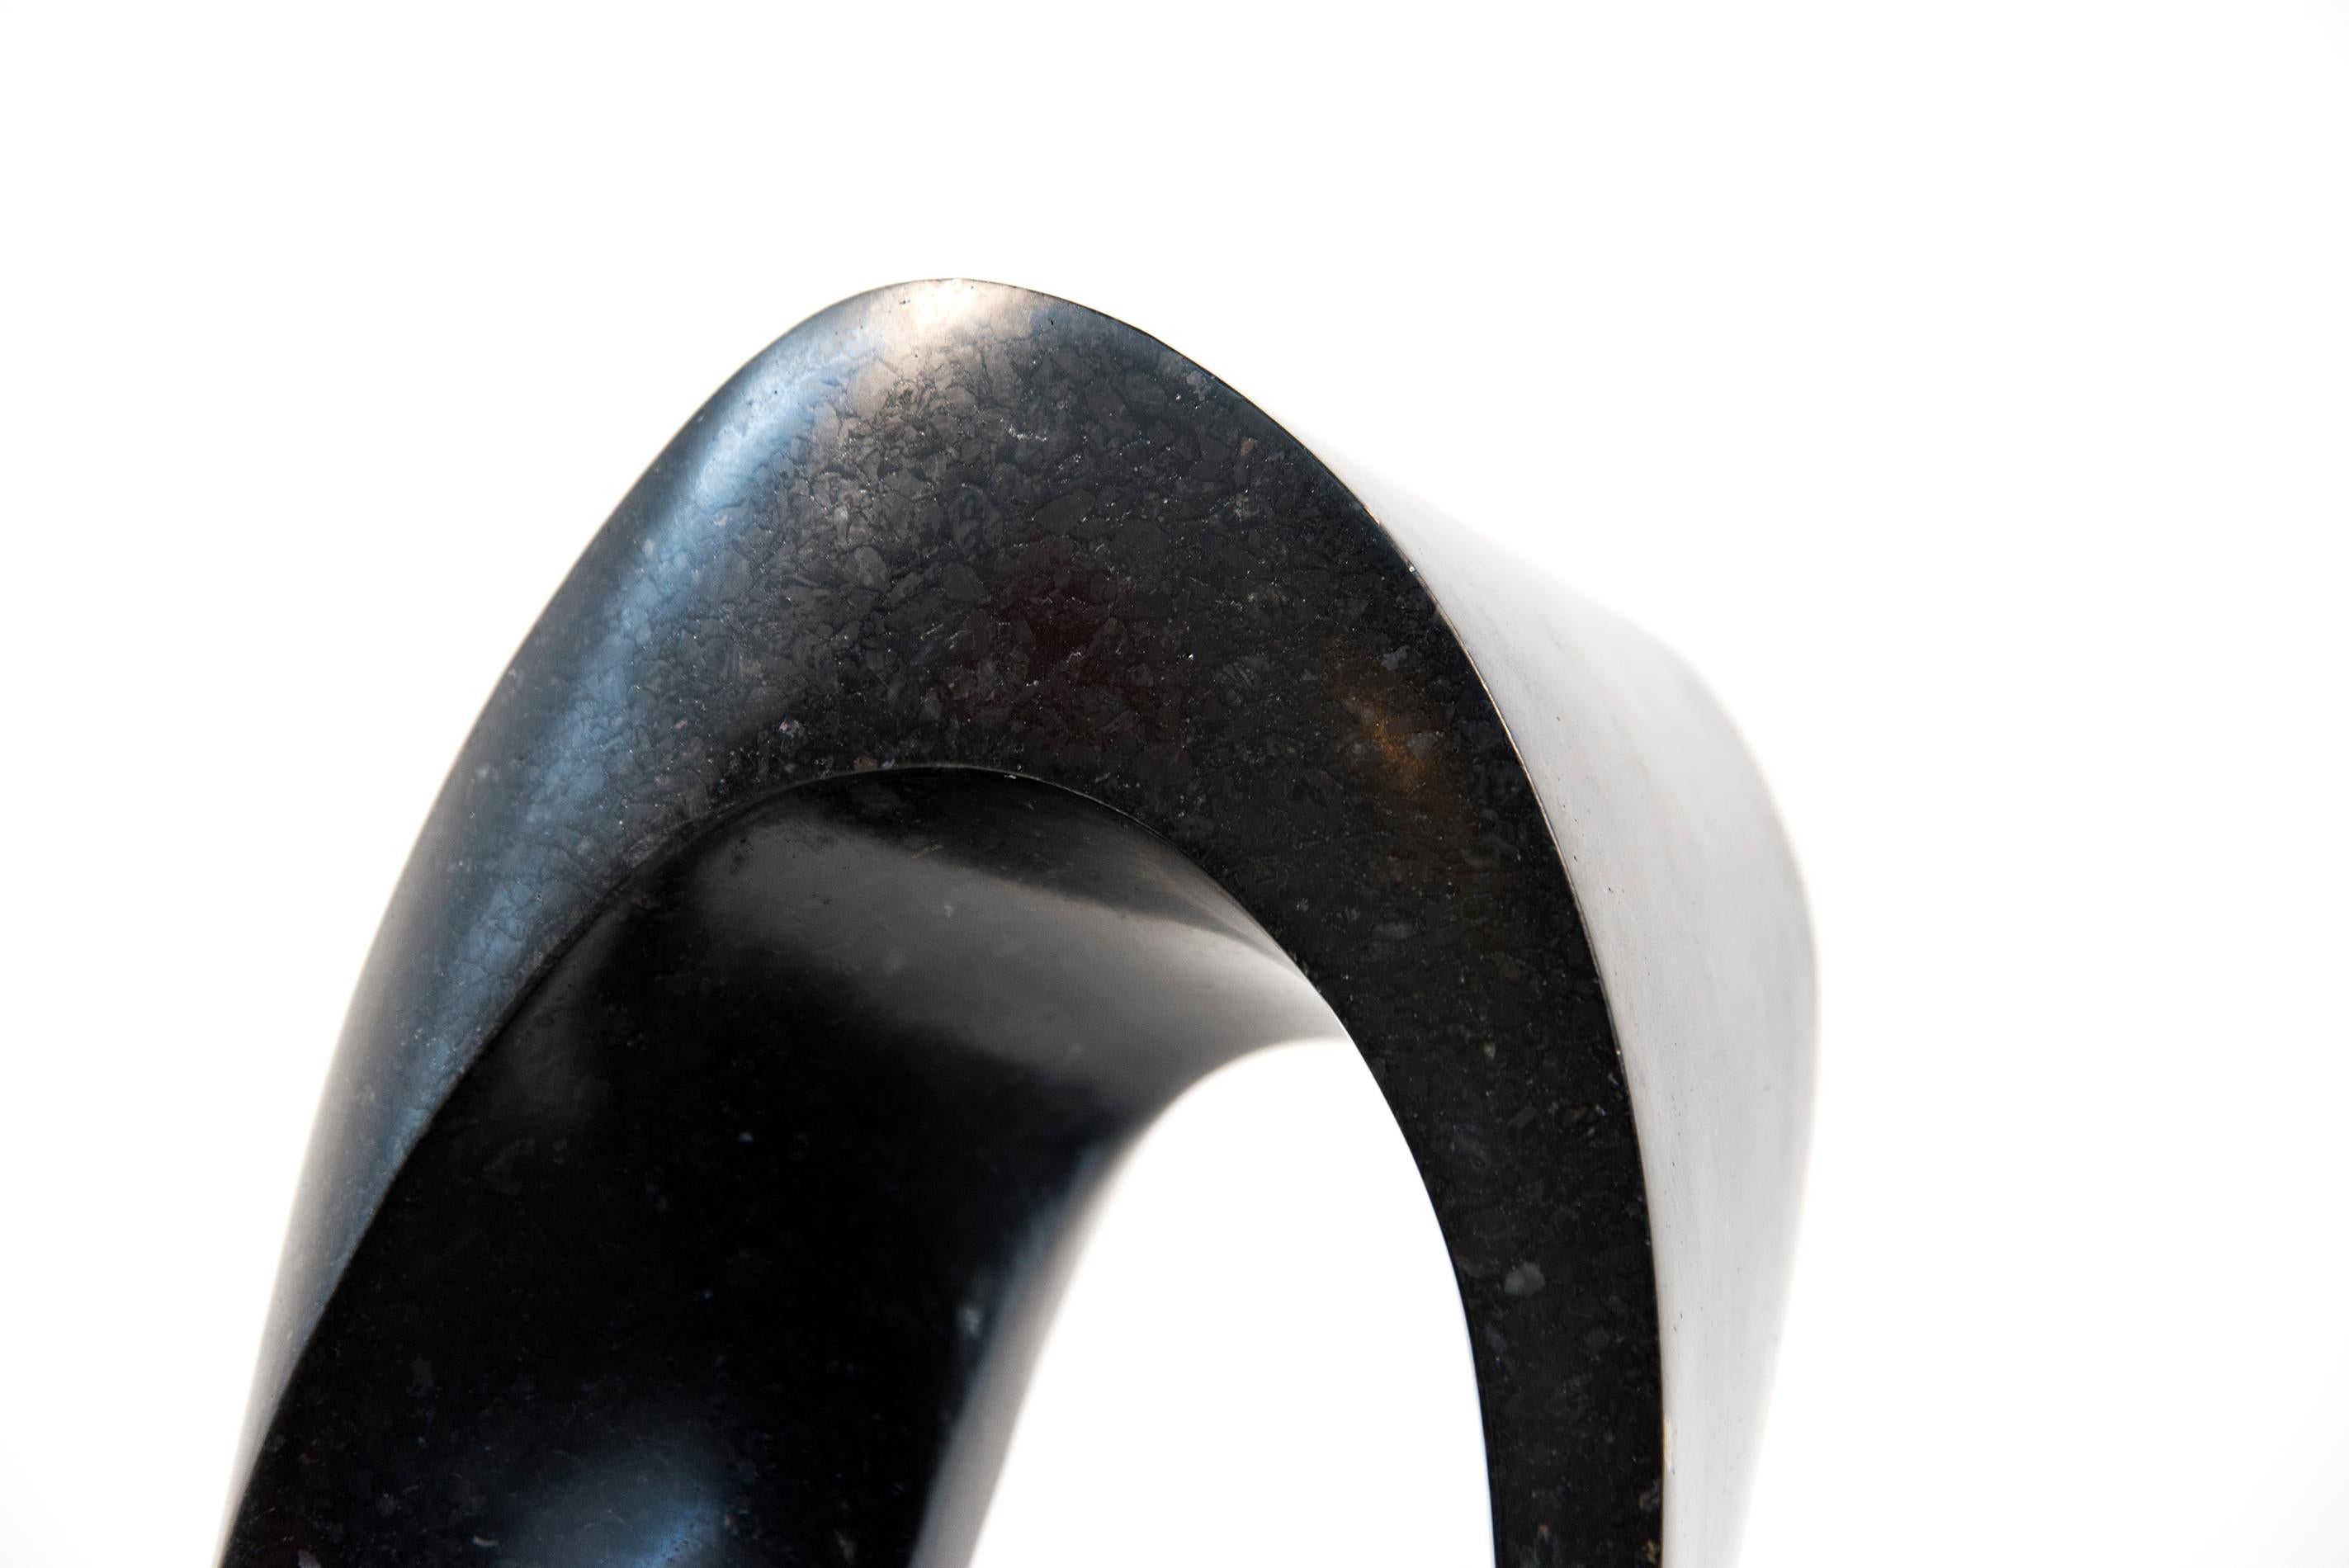 Mobius Minor 1/50 - dark, smooth, polished, abstract, black granite sculpture For Sale 3